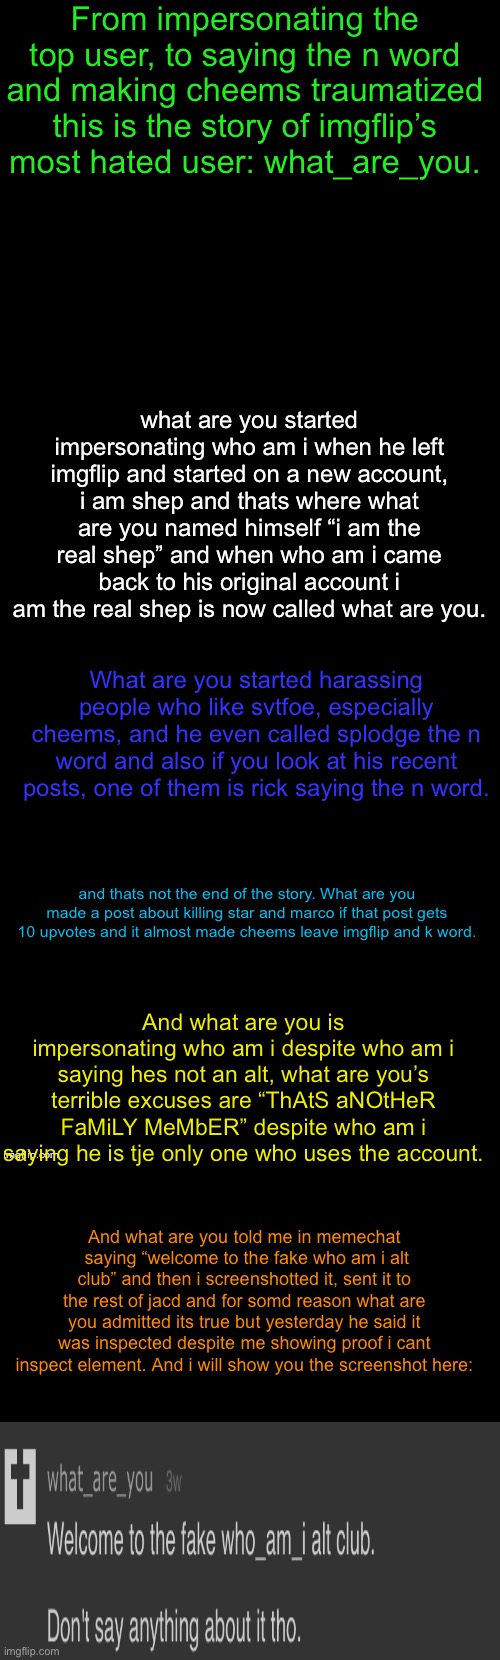 This should be enough proof, hopefully enough to get him banned. | From impersonating the top user, to saying the n word and making cheems traumatized this is the story of imgflip’s most hated user: what_are_you. what are you started impersonating who am i when he left imgflip and started on a new account, i am shep and thats where what are you named himself “i am the real shep” and when who am i came back to his original account i am the real shep is now called what are you. What are you started harassing people who like svtfoe, especially cheems, and he even called splodge the n word and also if you look at his recent posts, one of them is rick saying the n word. and thats not the end of the story. What are you made a post about killing star and marco if that post gets 10 upvotes and it almost made cheems leave imgflip and k word. And what are you is impersonating who am i despite who am i saying hes not an alt, what are you’s terrible excuses are “ThAtS aNOtHeR FaMiLY MeMbER” despite who am i saying he is tje only one who uses the account. And what are you told me in memechat  saying “welcome to the fake who am i alt club” and then i screenshotted it, sent it to the rest of jacd and for somd reason what are you admitted its true but yesterday he said it was inspected despite me showing proof i cant inspect element. And i will show you the screenshot here: | image tagged in double long black template | made w/ Imgflip meme maker